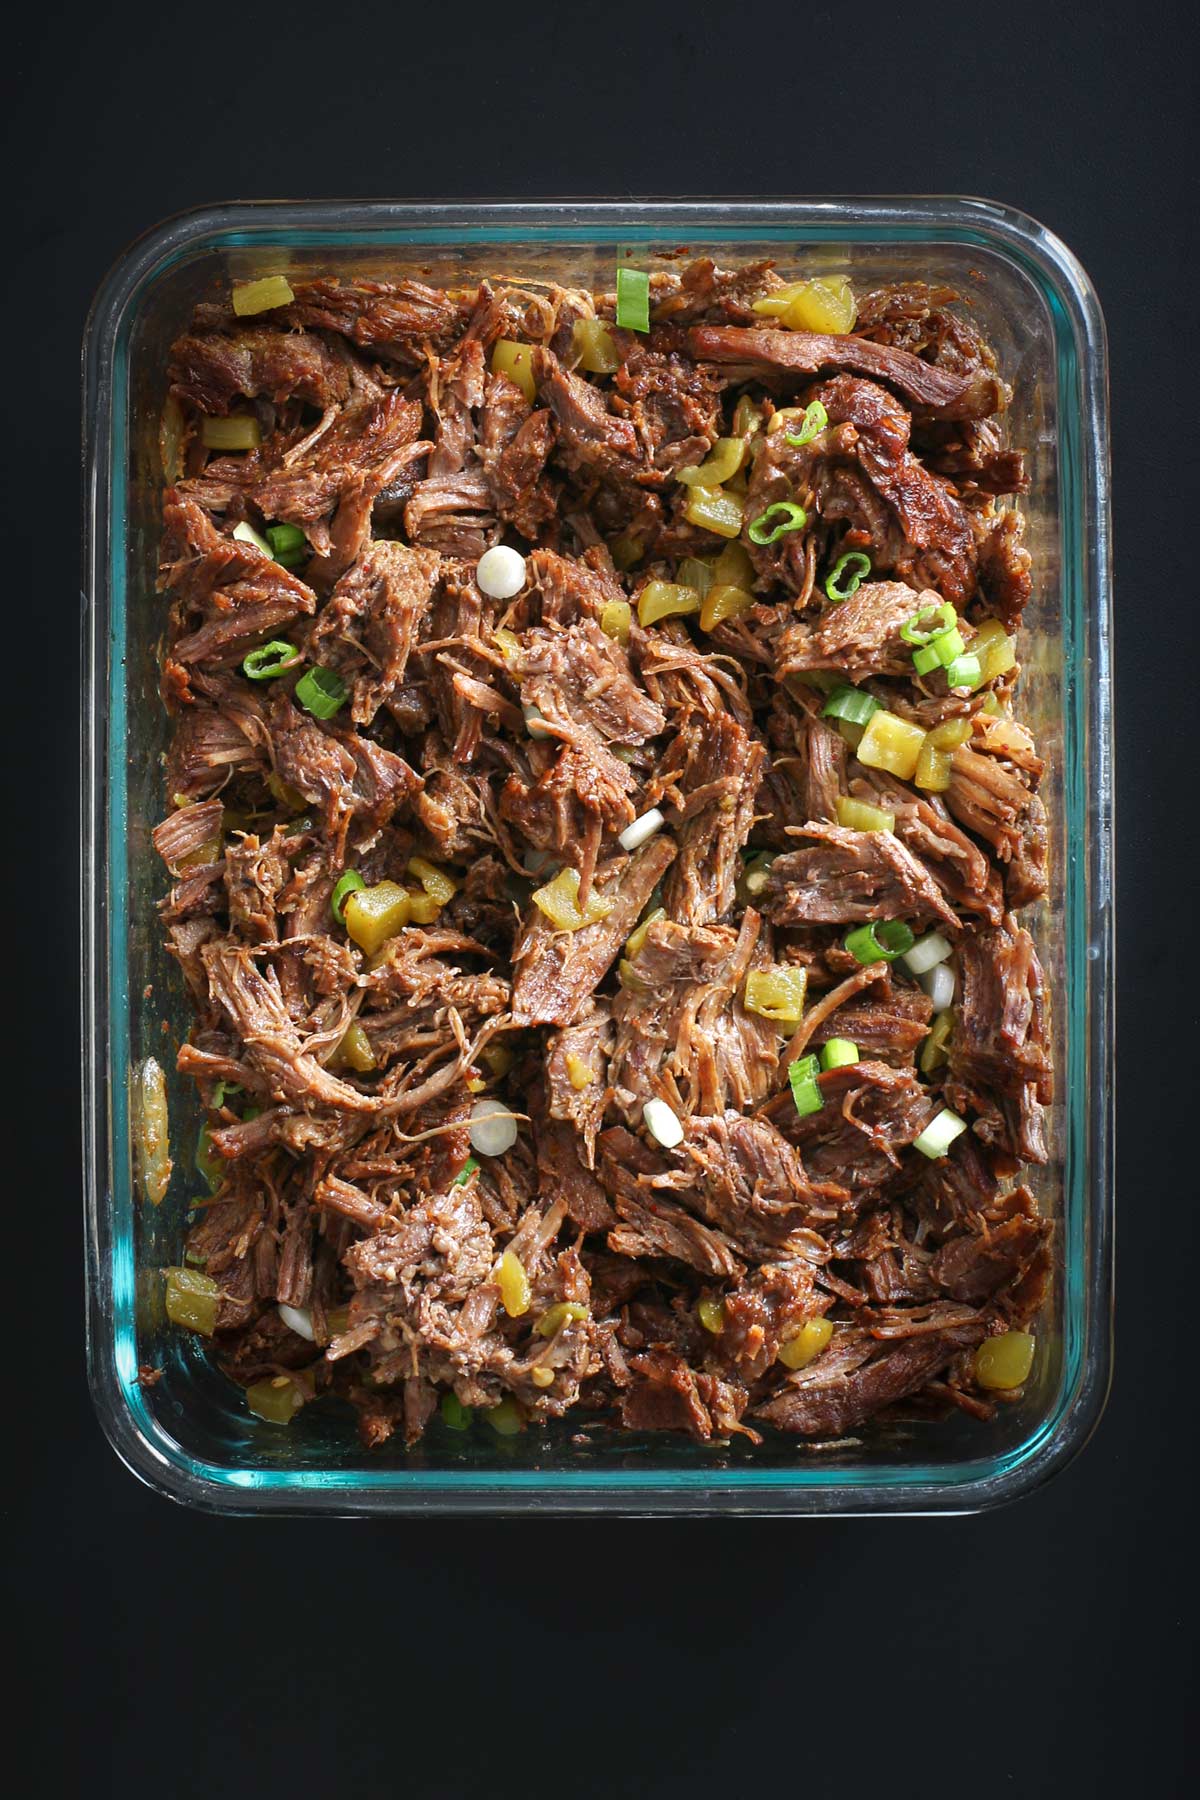 shredded beef in a glass storage container ready for freezing.